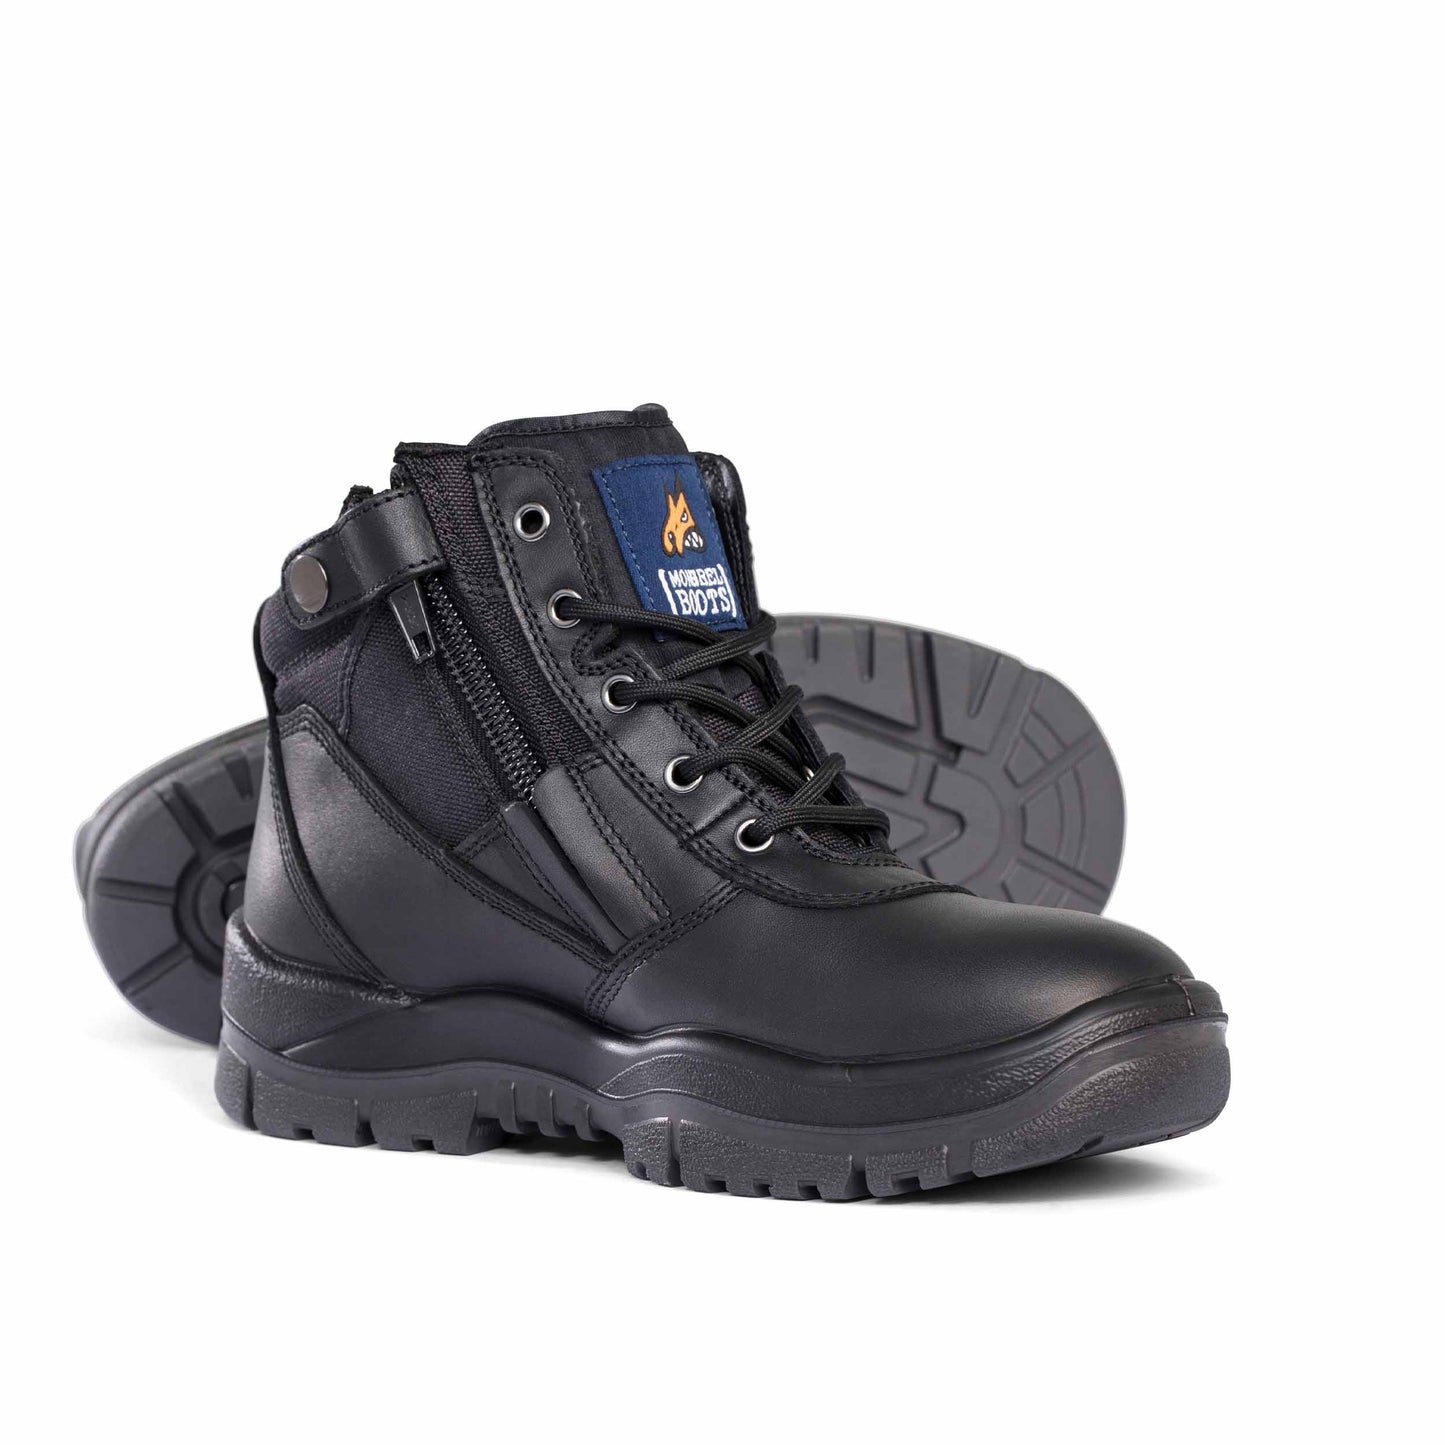 MONGREL 261020 SAFETY BOOTS - ZIP SIDE